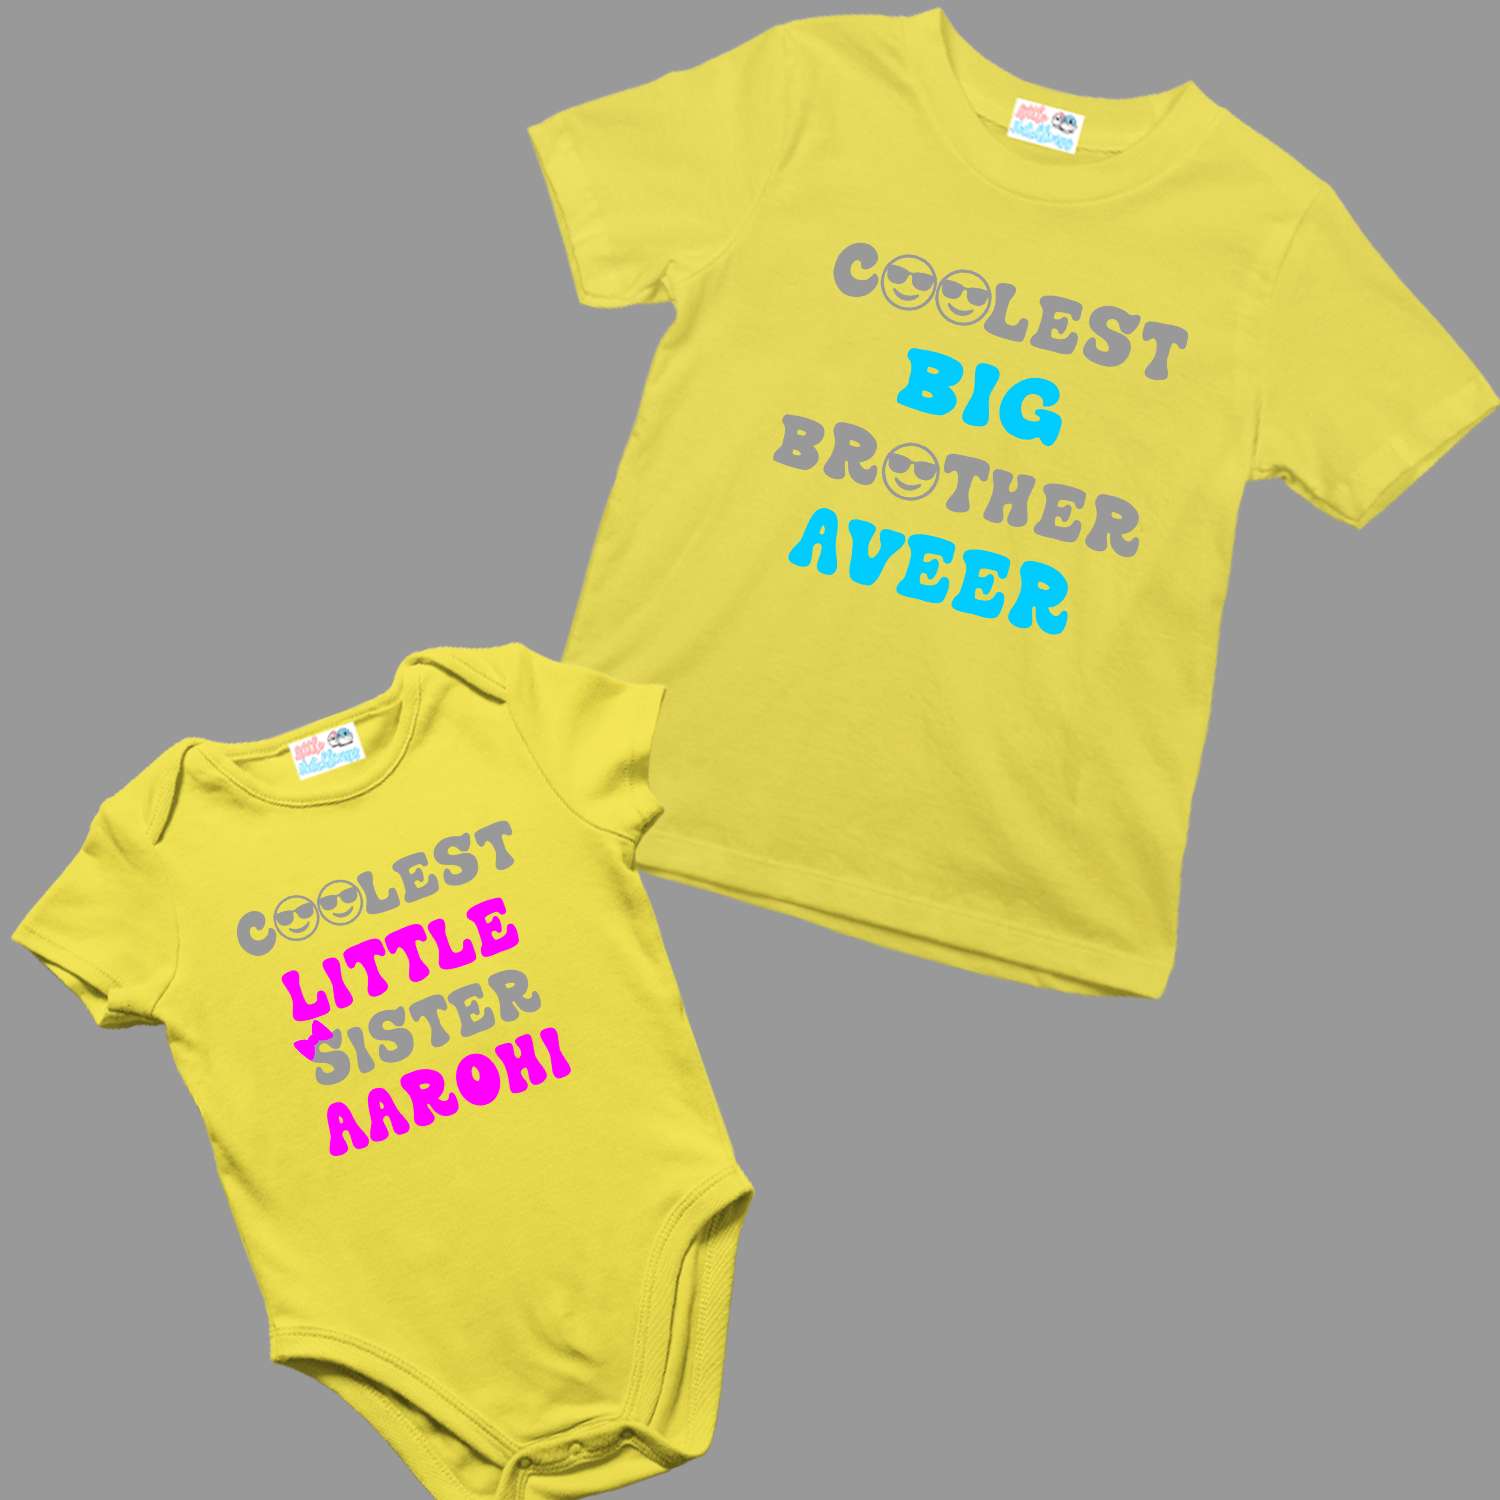 Cootest Big/Little Brother/Sister Personalised Yellow Onesie / Tshirt